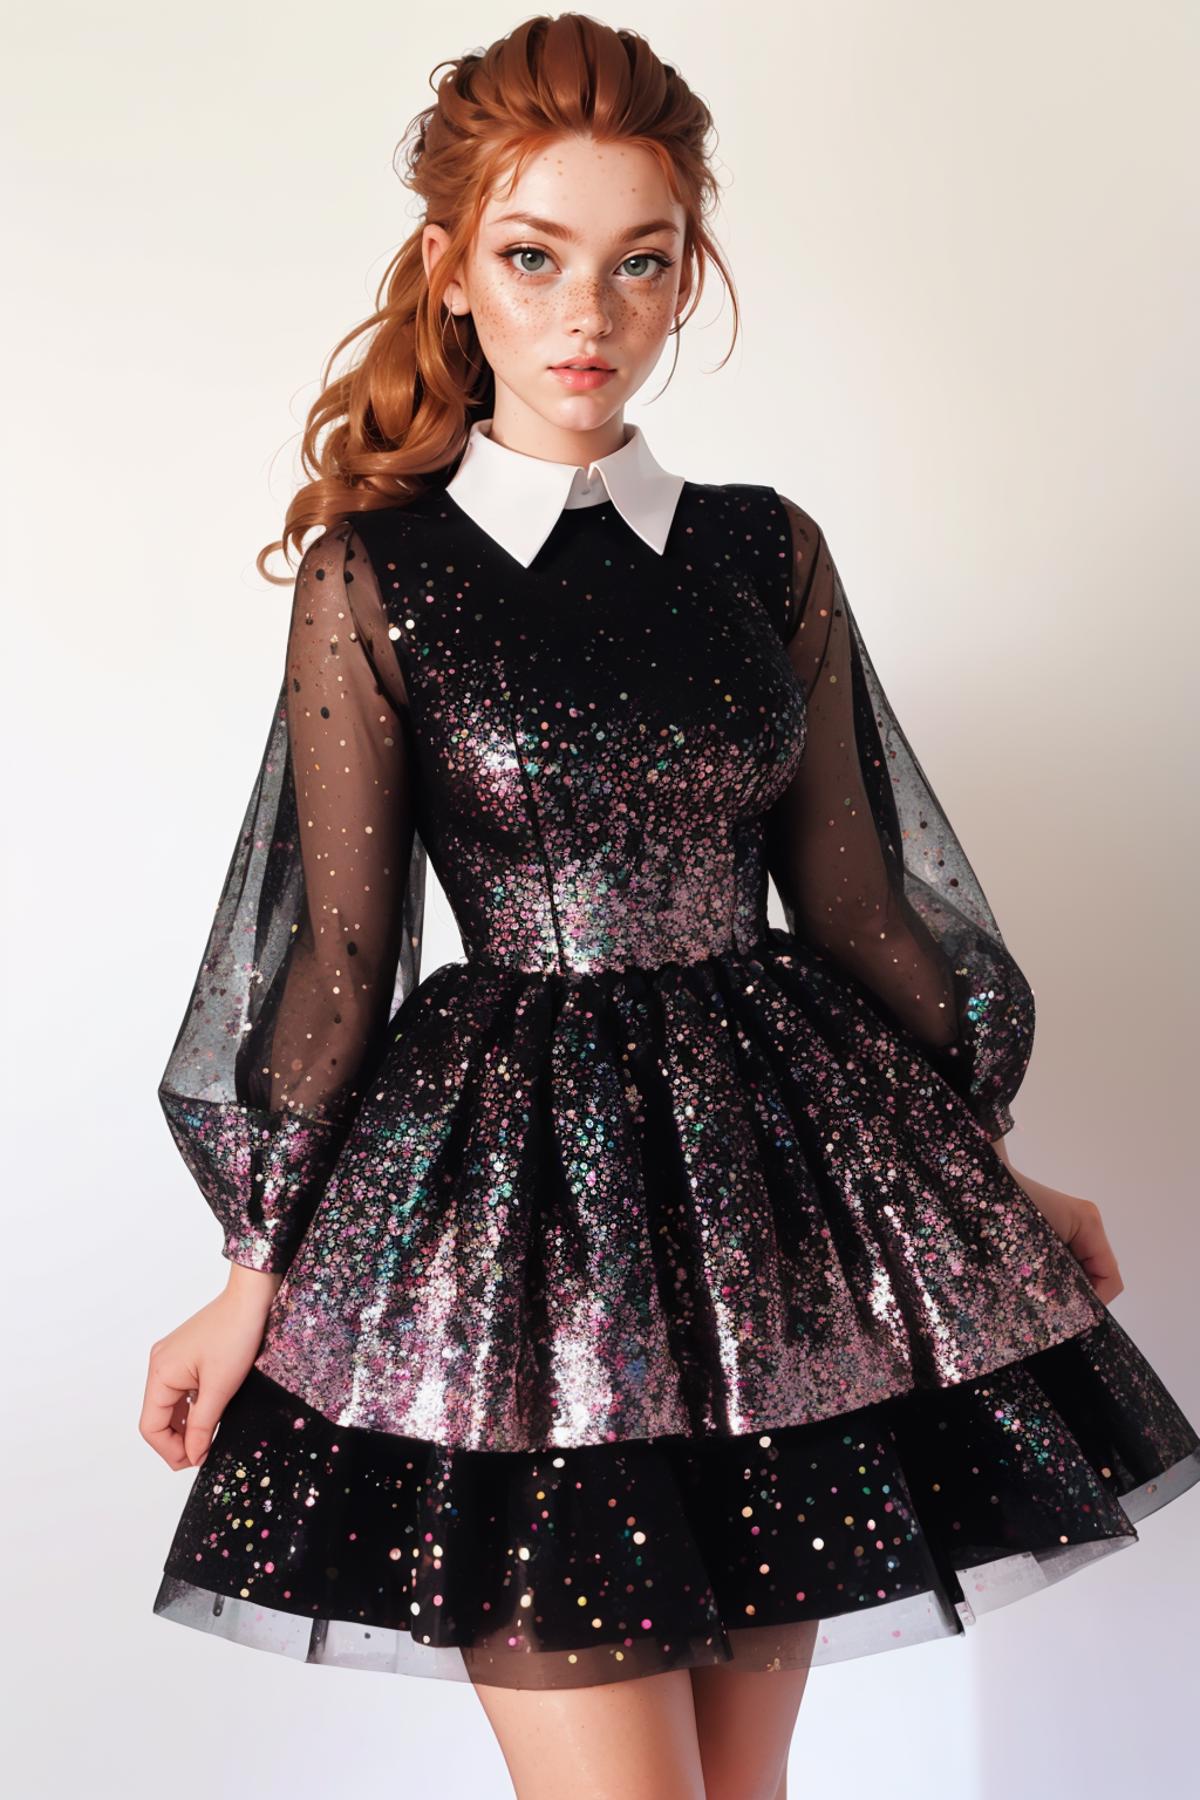 Constellation Glitter Dress image by freckledvixon